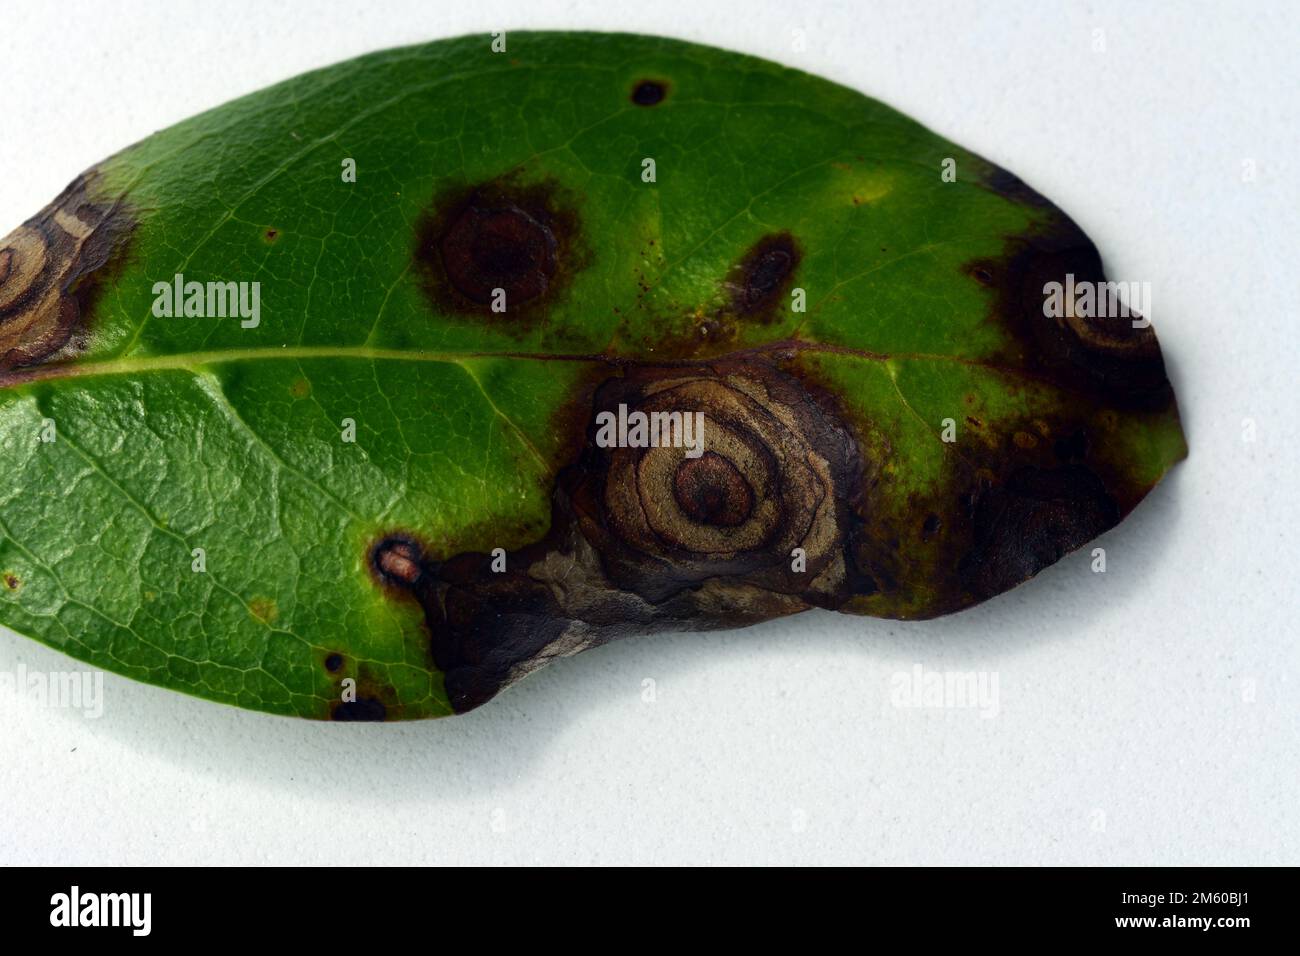 Macro of a leaf affected by blight disease, which is caused by bacterial or fungal infestations. Stock Photo